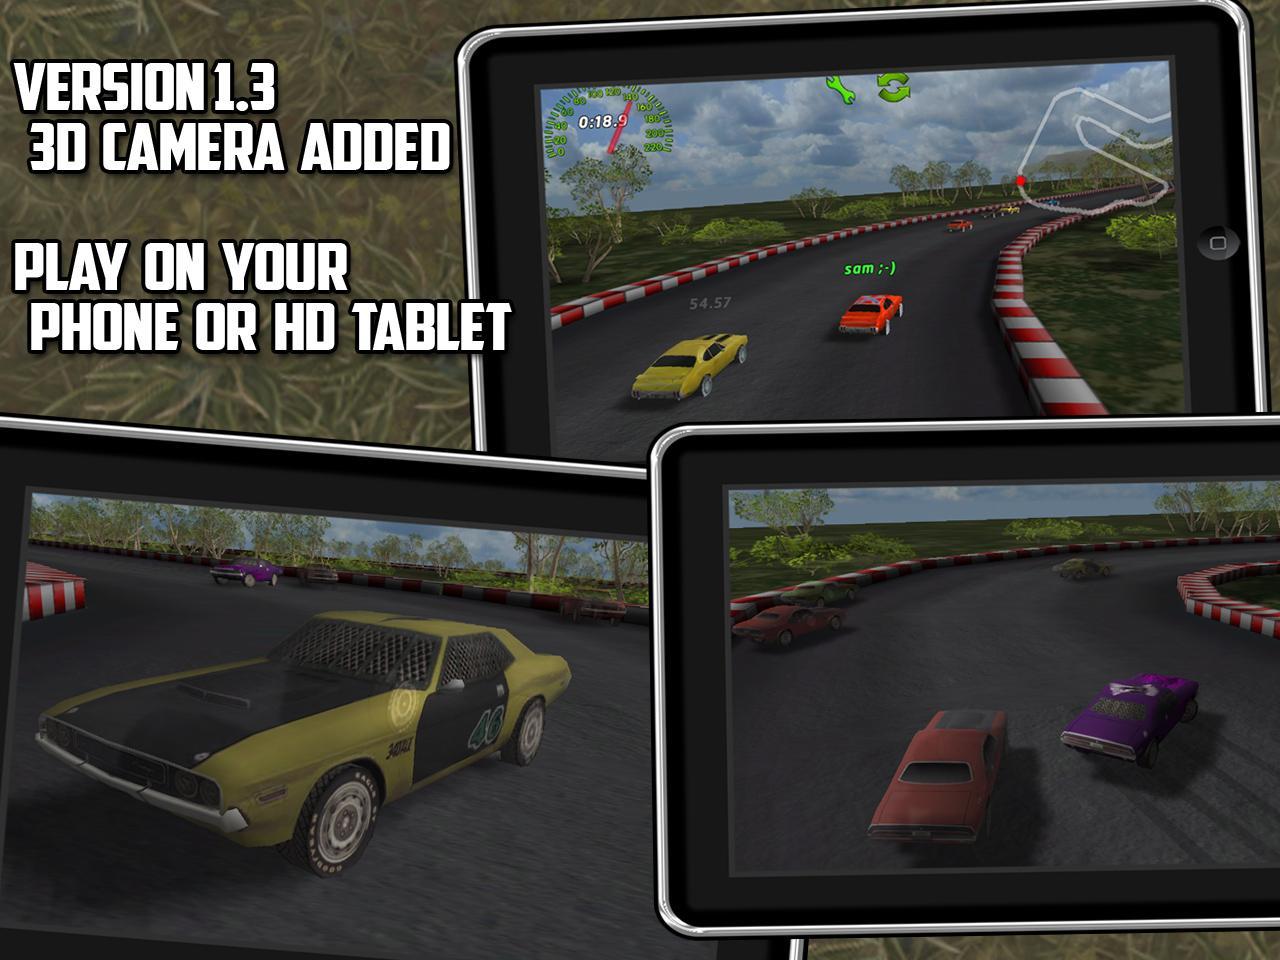 Racing in car Multiplayer. Sup Multiplayer Racing. Multiplayer car game распространи чтобы все знали (инфа сотка). Drive car multiplayer